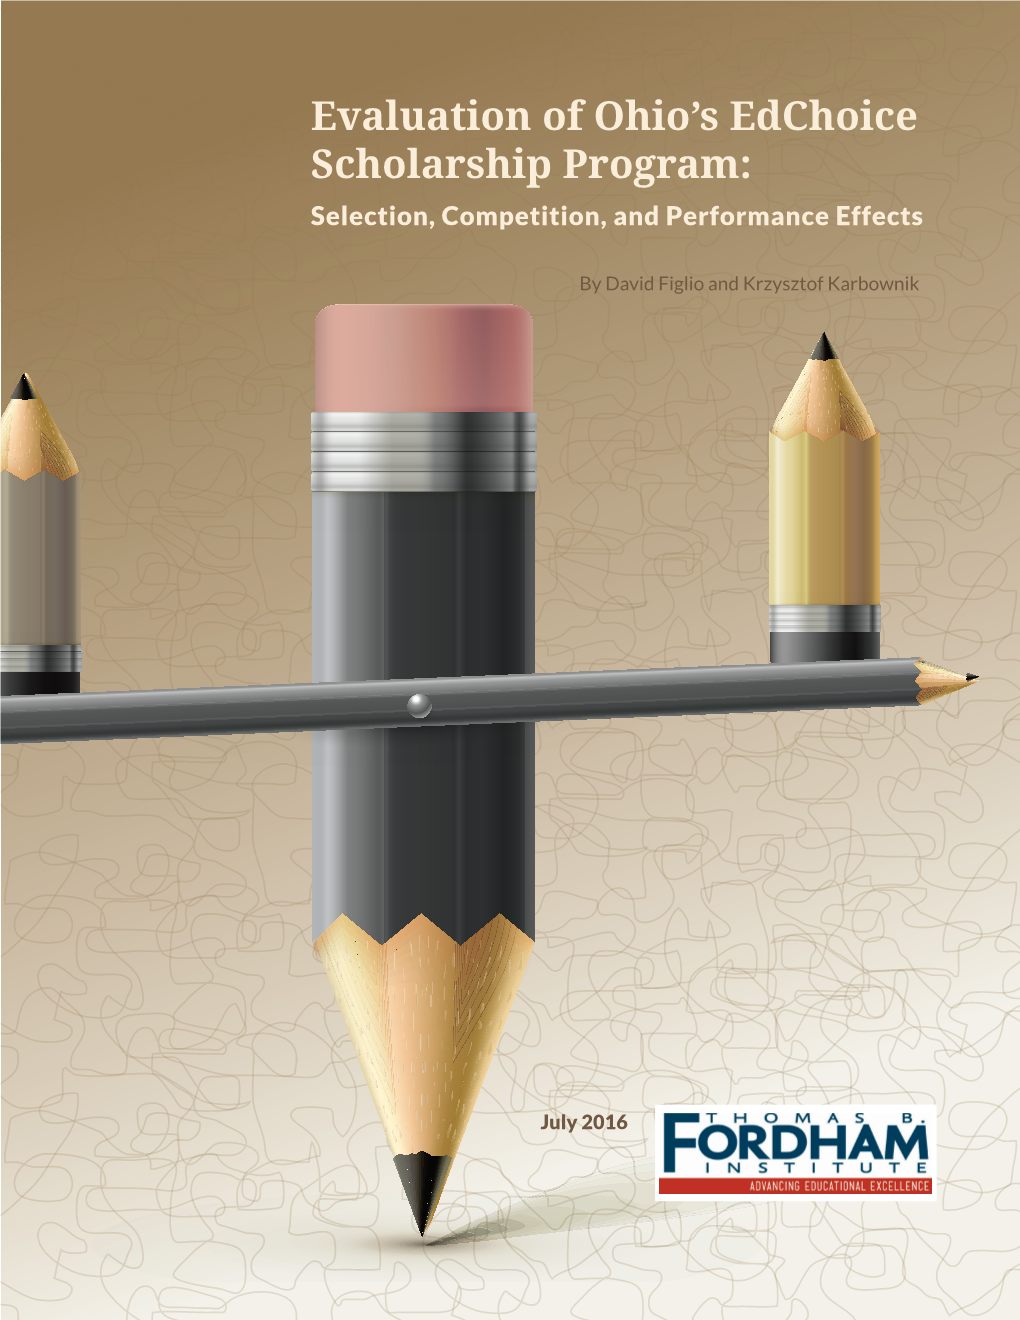 Ohio’S Edchoice Scholarship Program: Selection, Competition, and Performance Effects